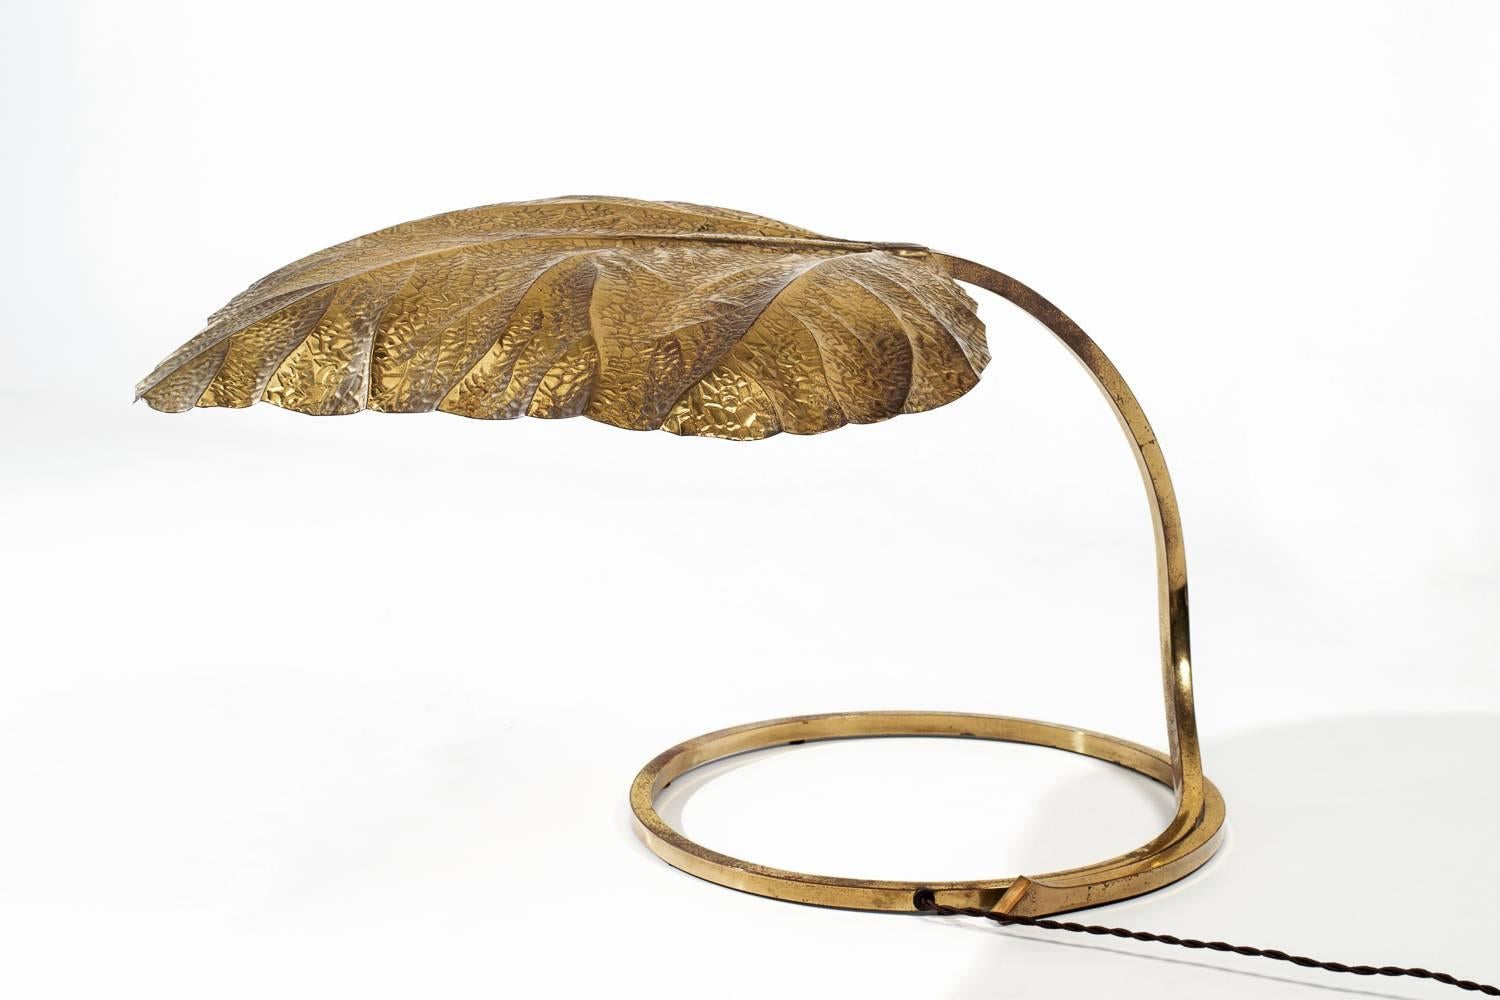 Huge Rhubarb leaf table lamp by Tomasso Barbi, Italy, 1960s. Beautiful Sensual and Elegant forms out of hammered brass. All handmade by the best Italian craftsmen. Provides a nice warm light due to the hammered brass surface. In excellent condition